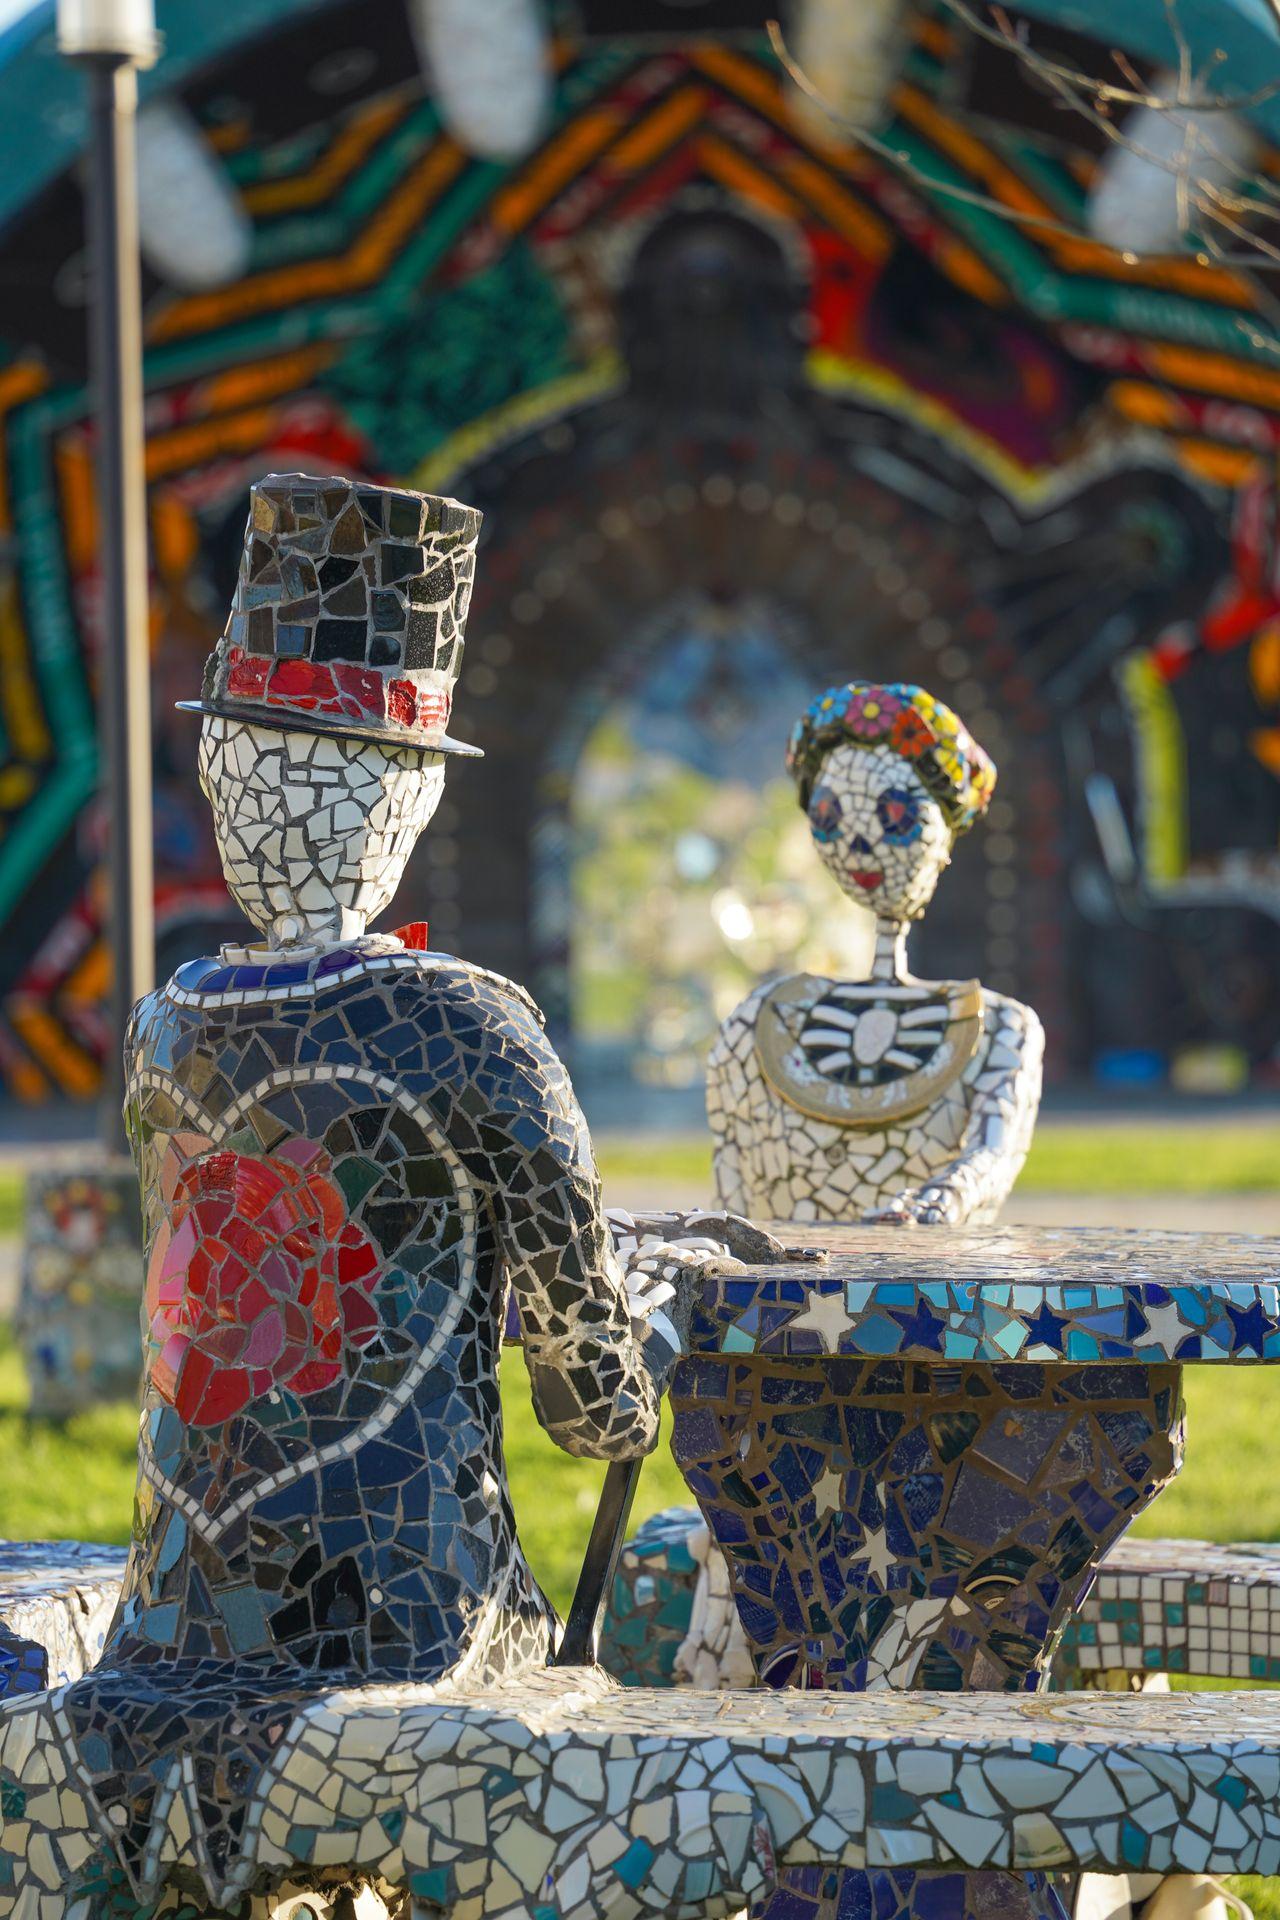 Two skeletons sitting at a table in Smither Park. The skeletons and table are covered in mosaic tiles